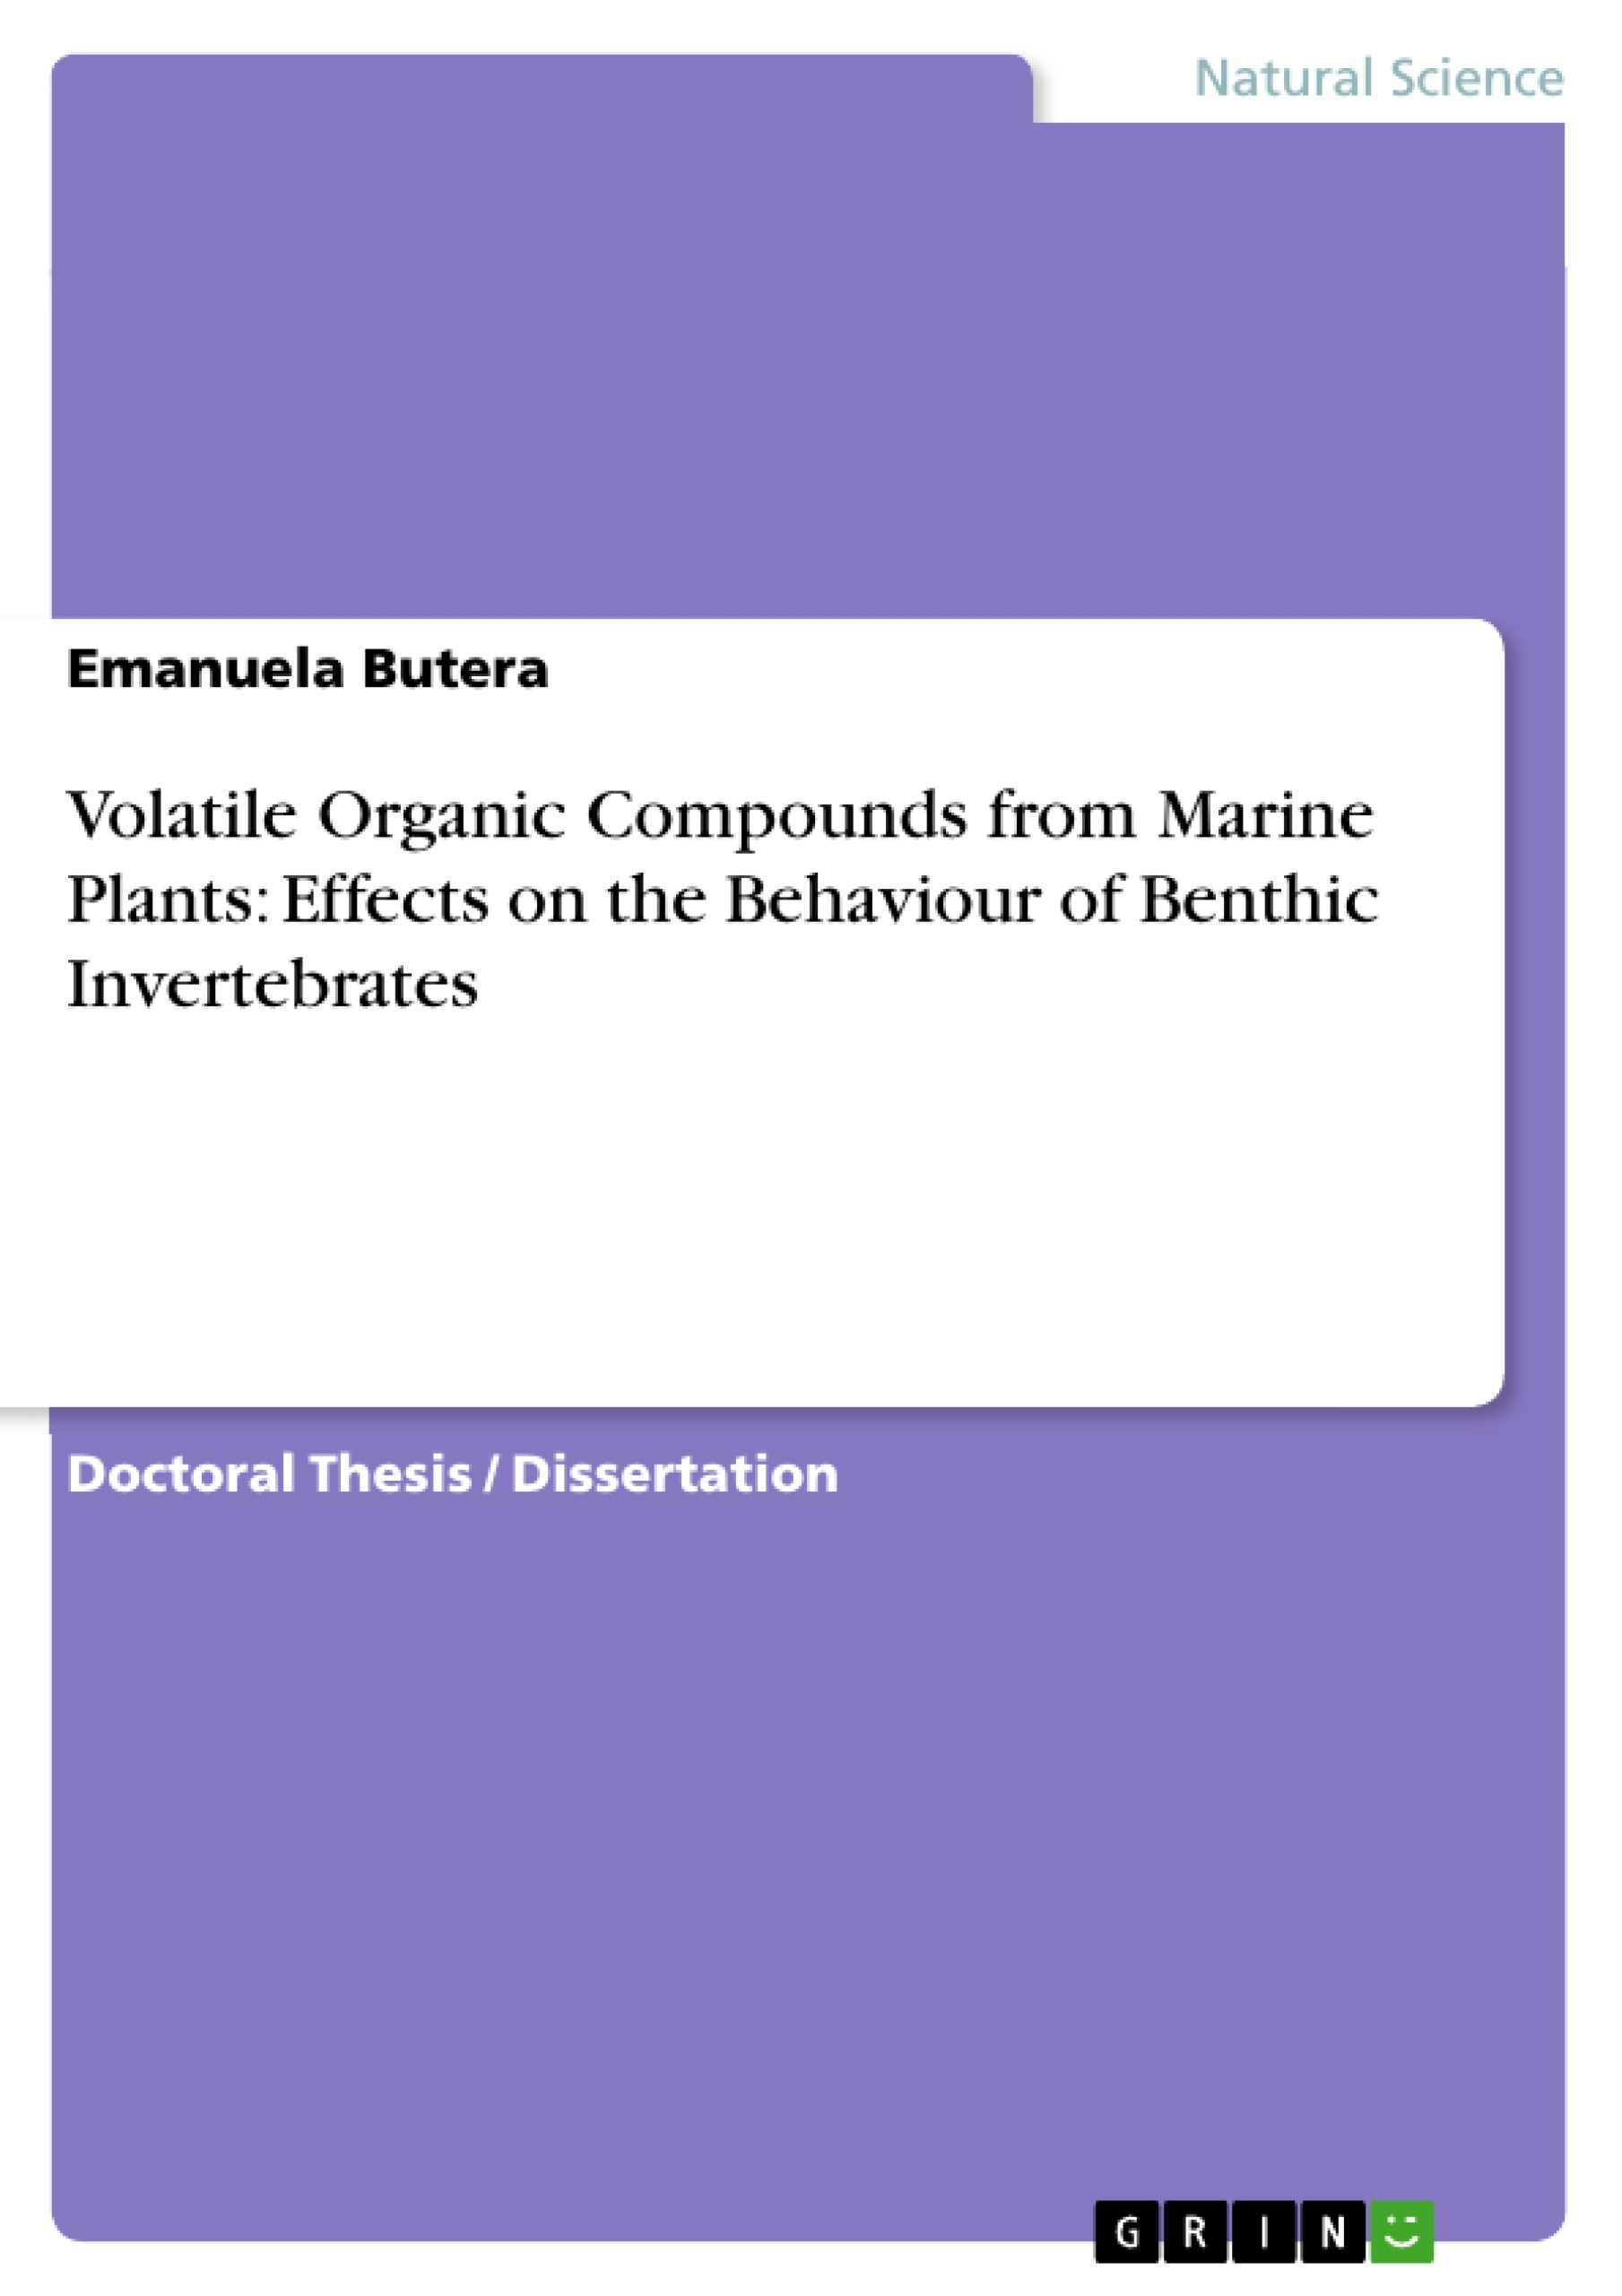 Titre: Volatile Organic Compounds from Marine Plants: Effects on the Behaviour of Benthic Invertebrates